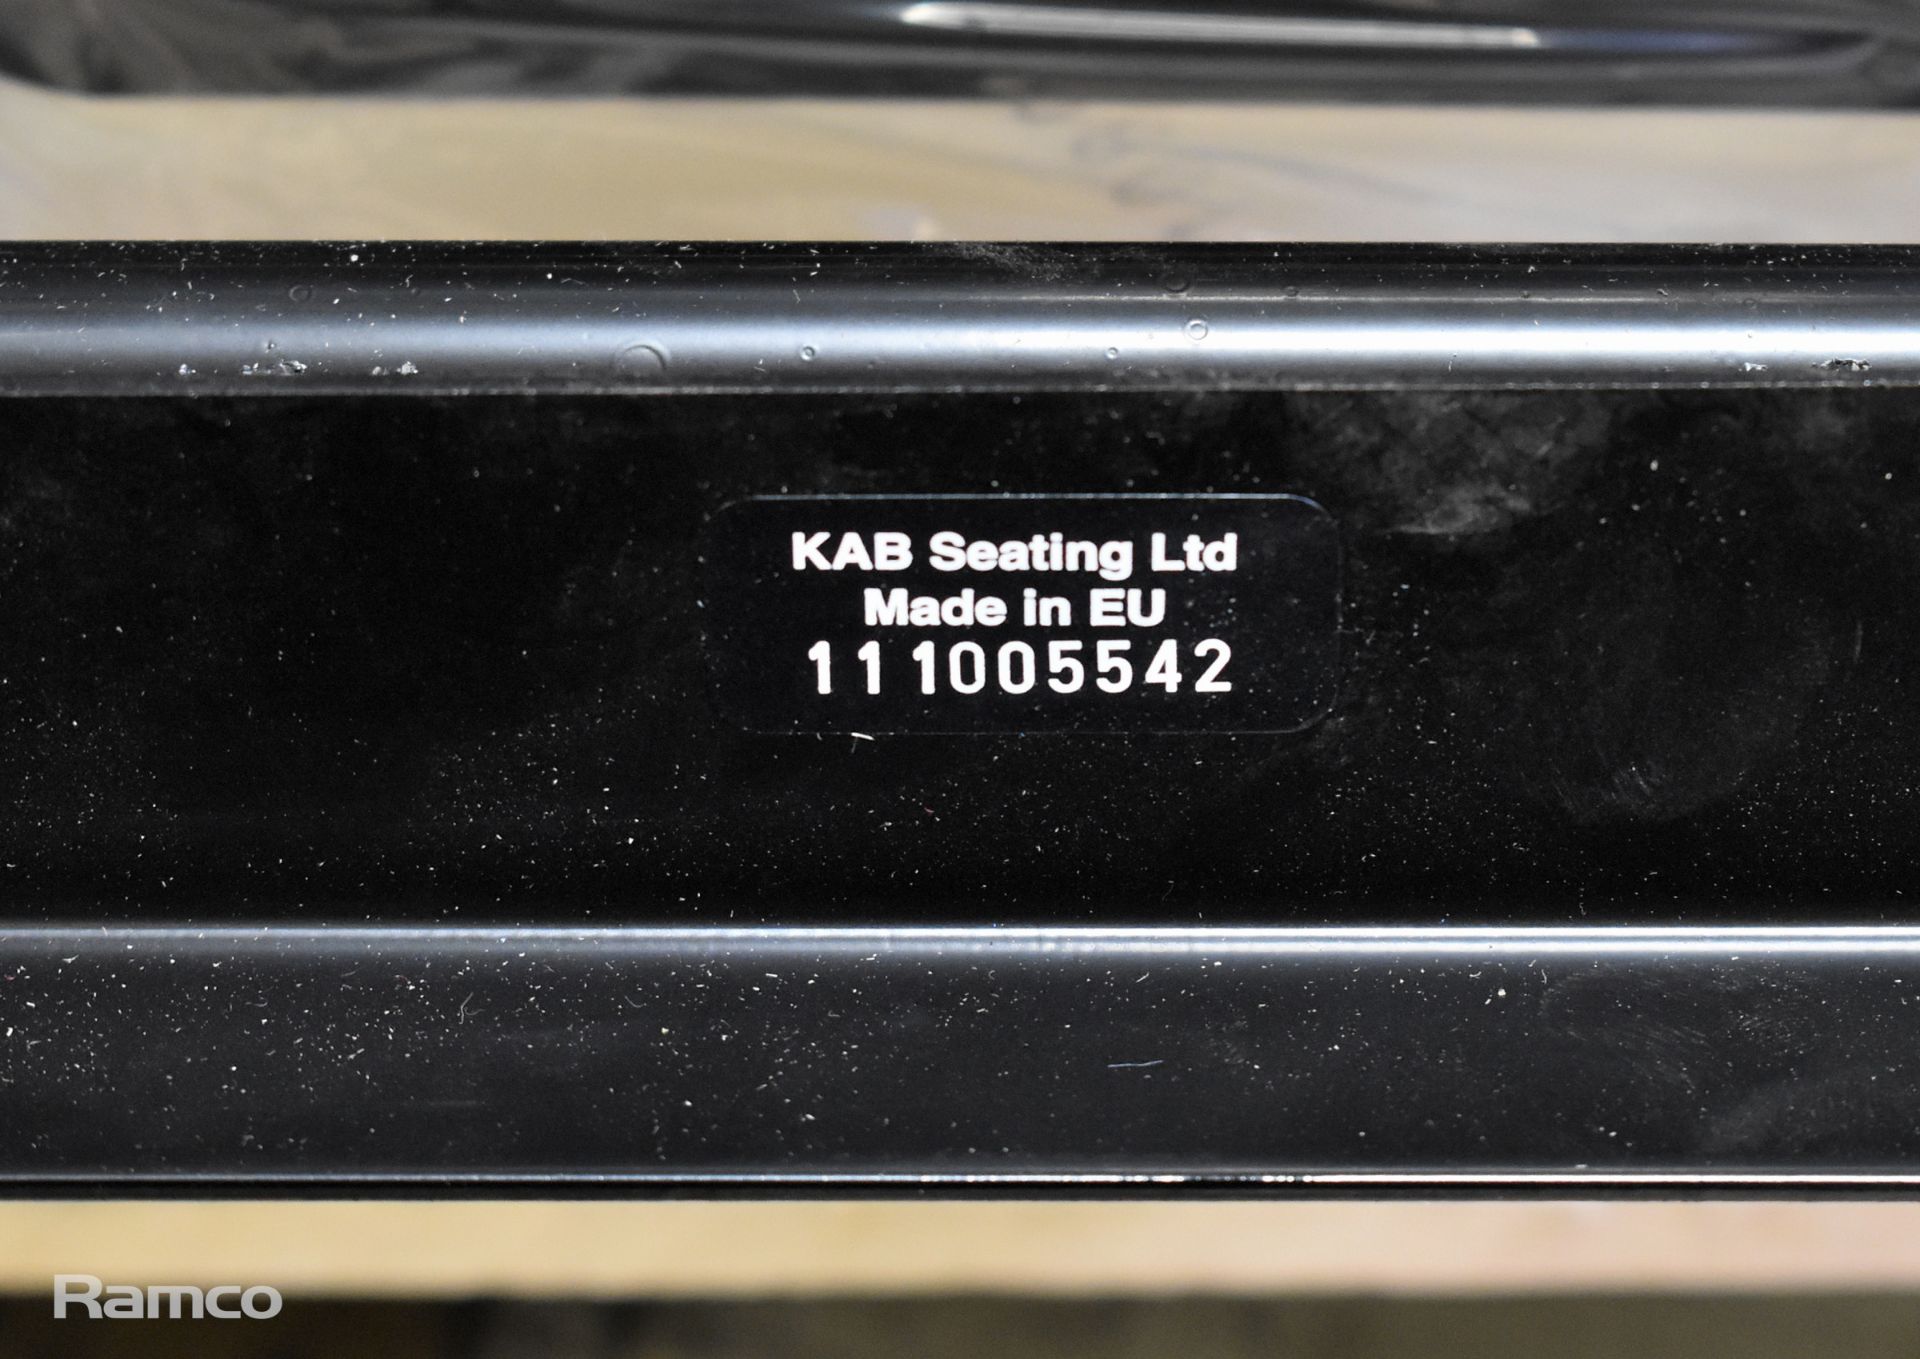 2x KAB seats - upholstered - Image 7 of 8